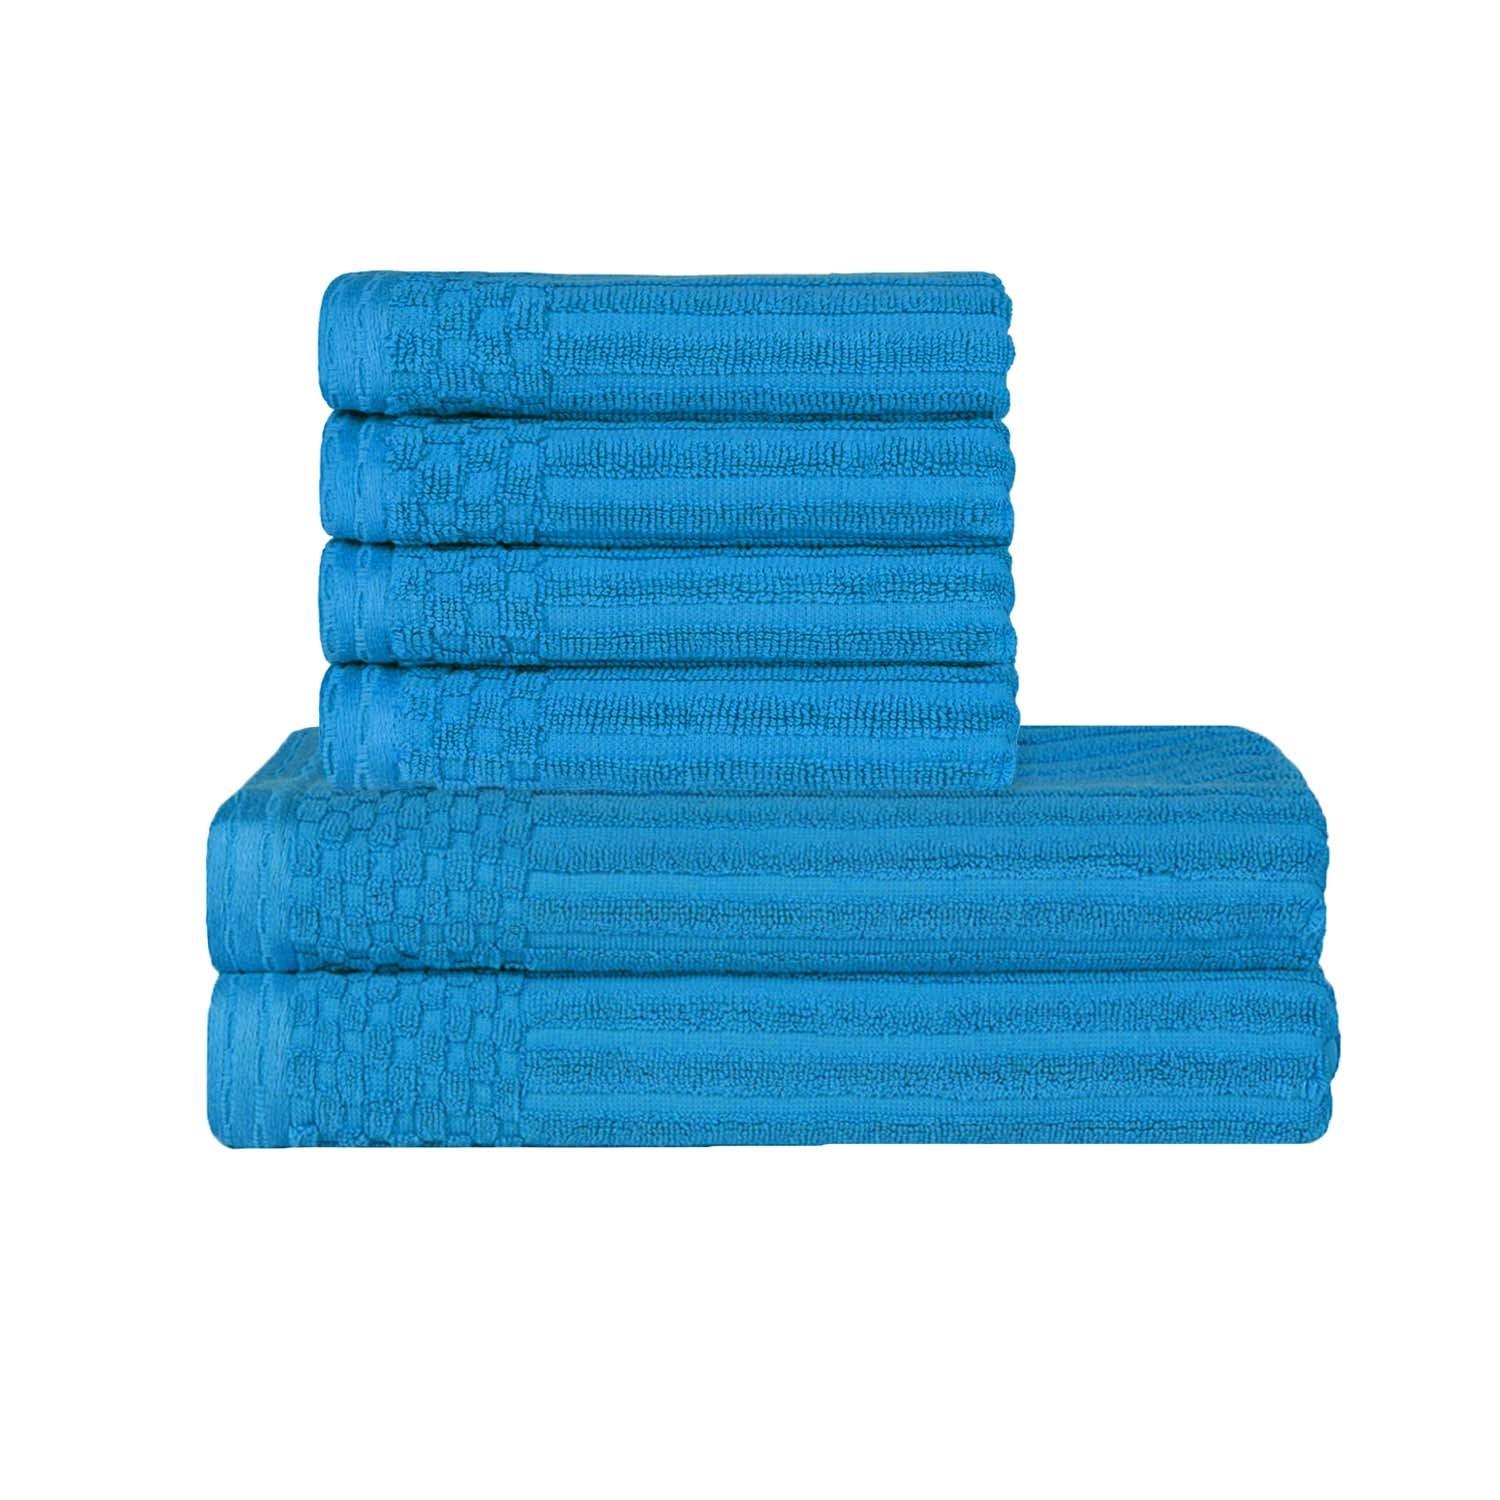  Superior Soho Ribbed Textured Cotton Ultra-Absorbent Hand and Bath Towel Set - Azure